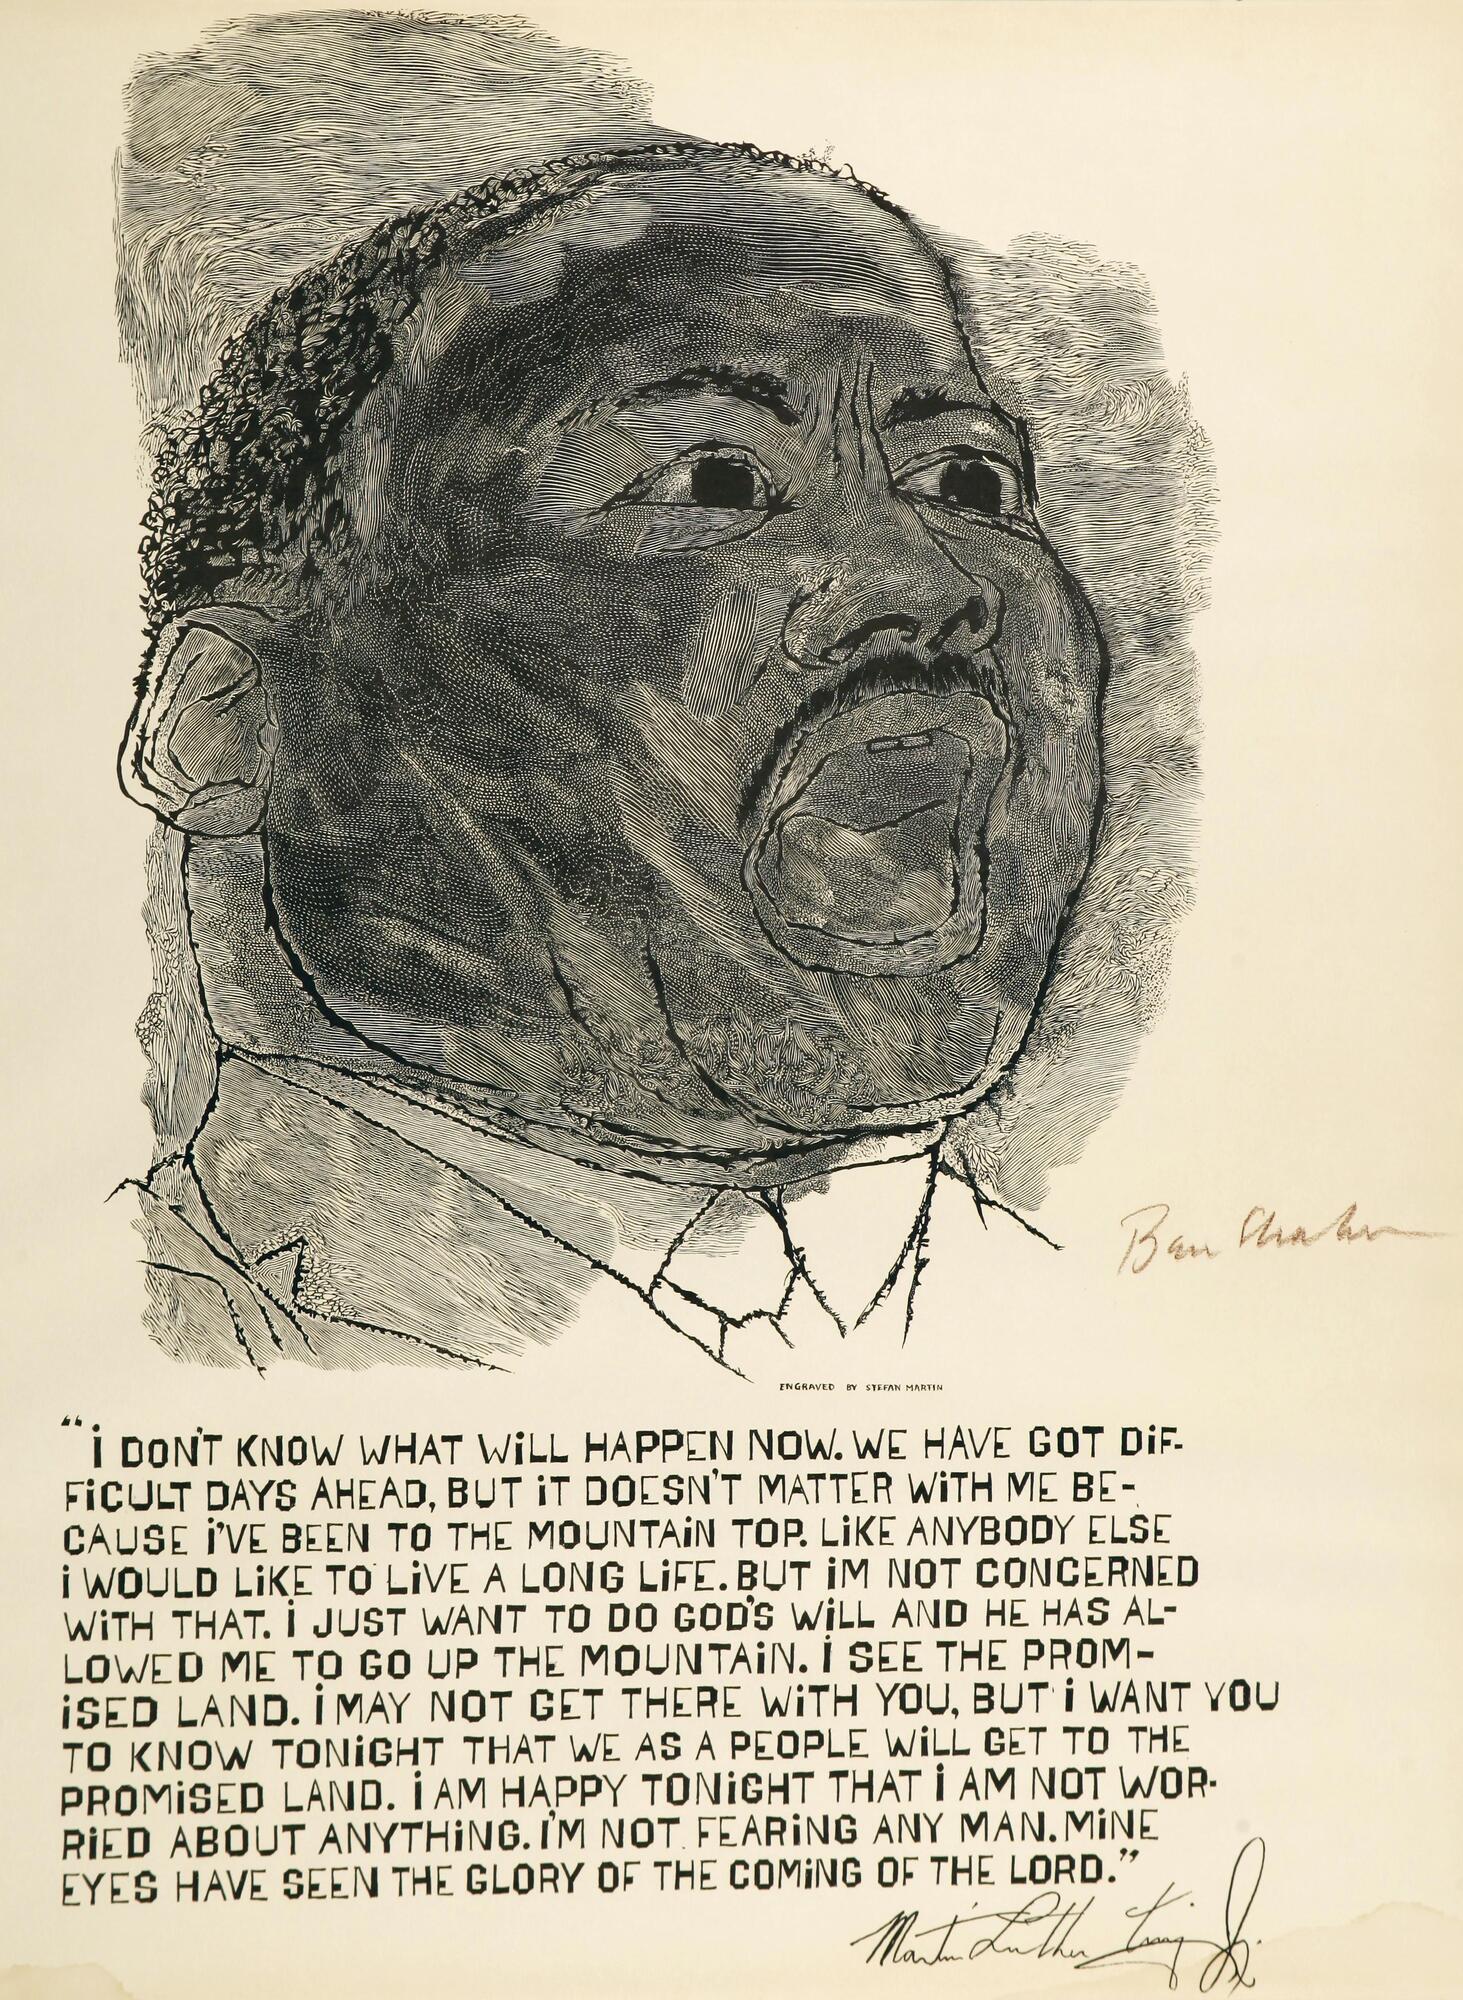 A black and white wood engraving of Martin Luther King Jr.  His mouth is open wide as if giving one of his famous speeches.  Underneath his image is a quote of King's and his signature.